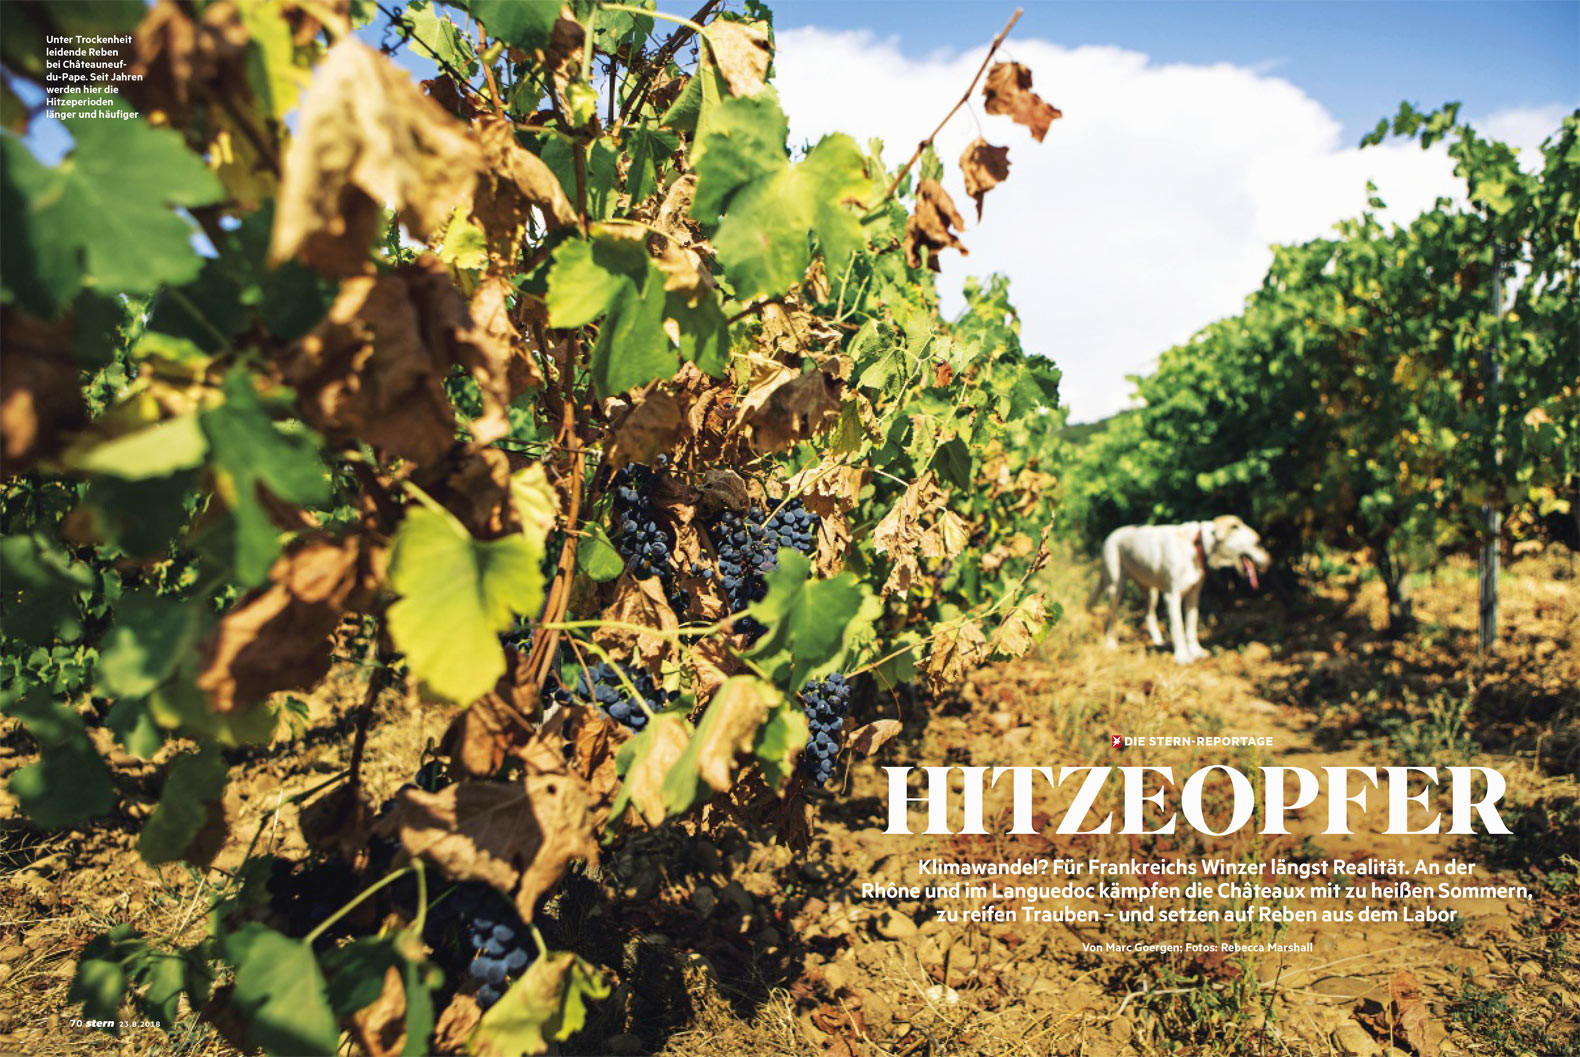 Double-page photograph showing grapevines on a vineyard and a panting dog, title text overlaid